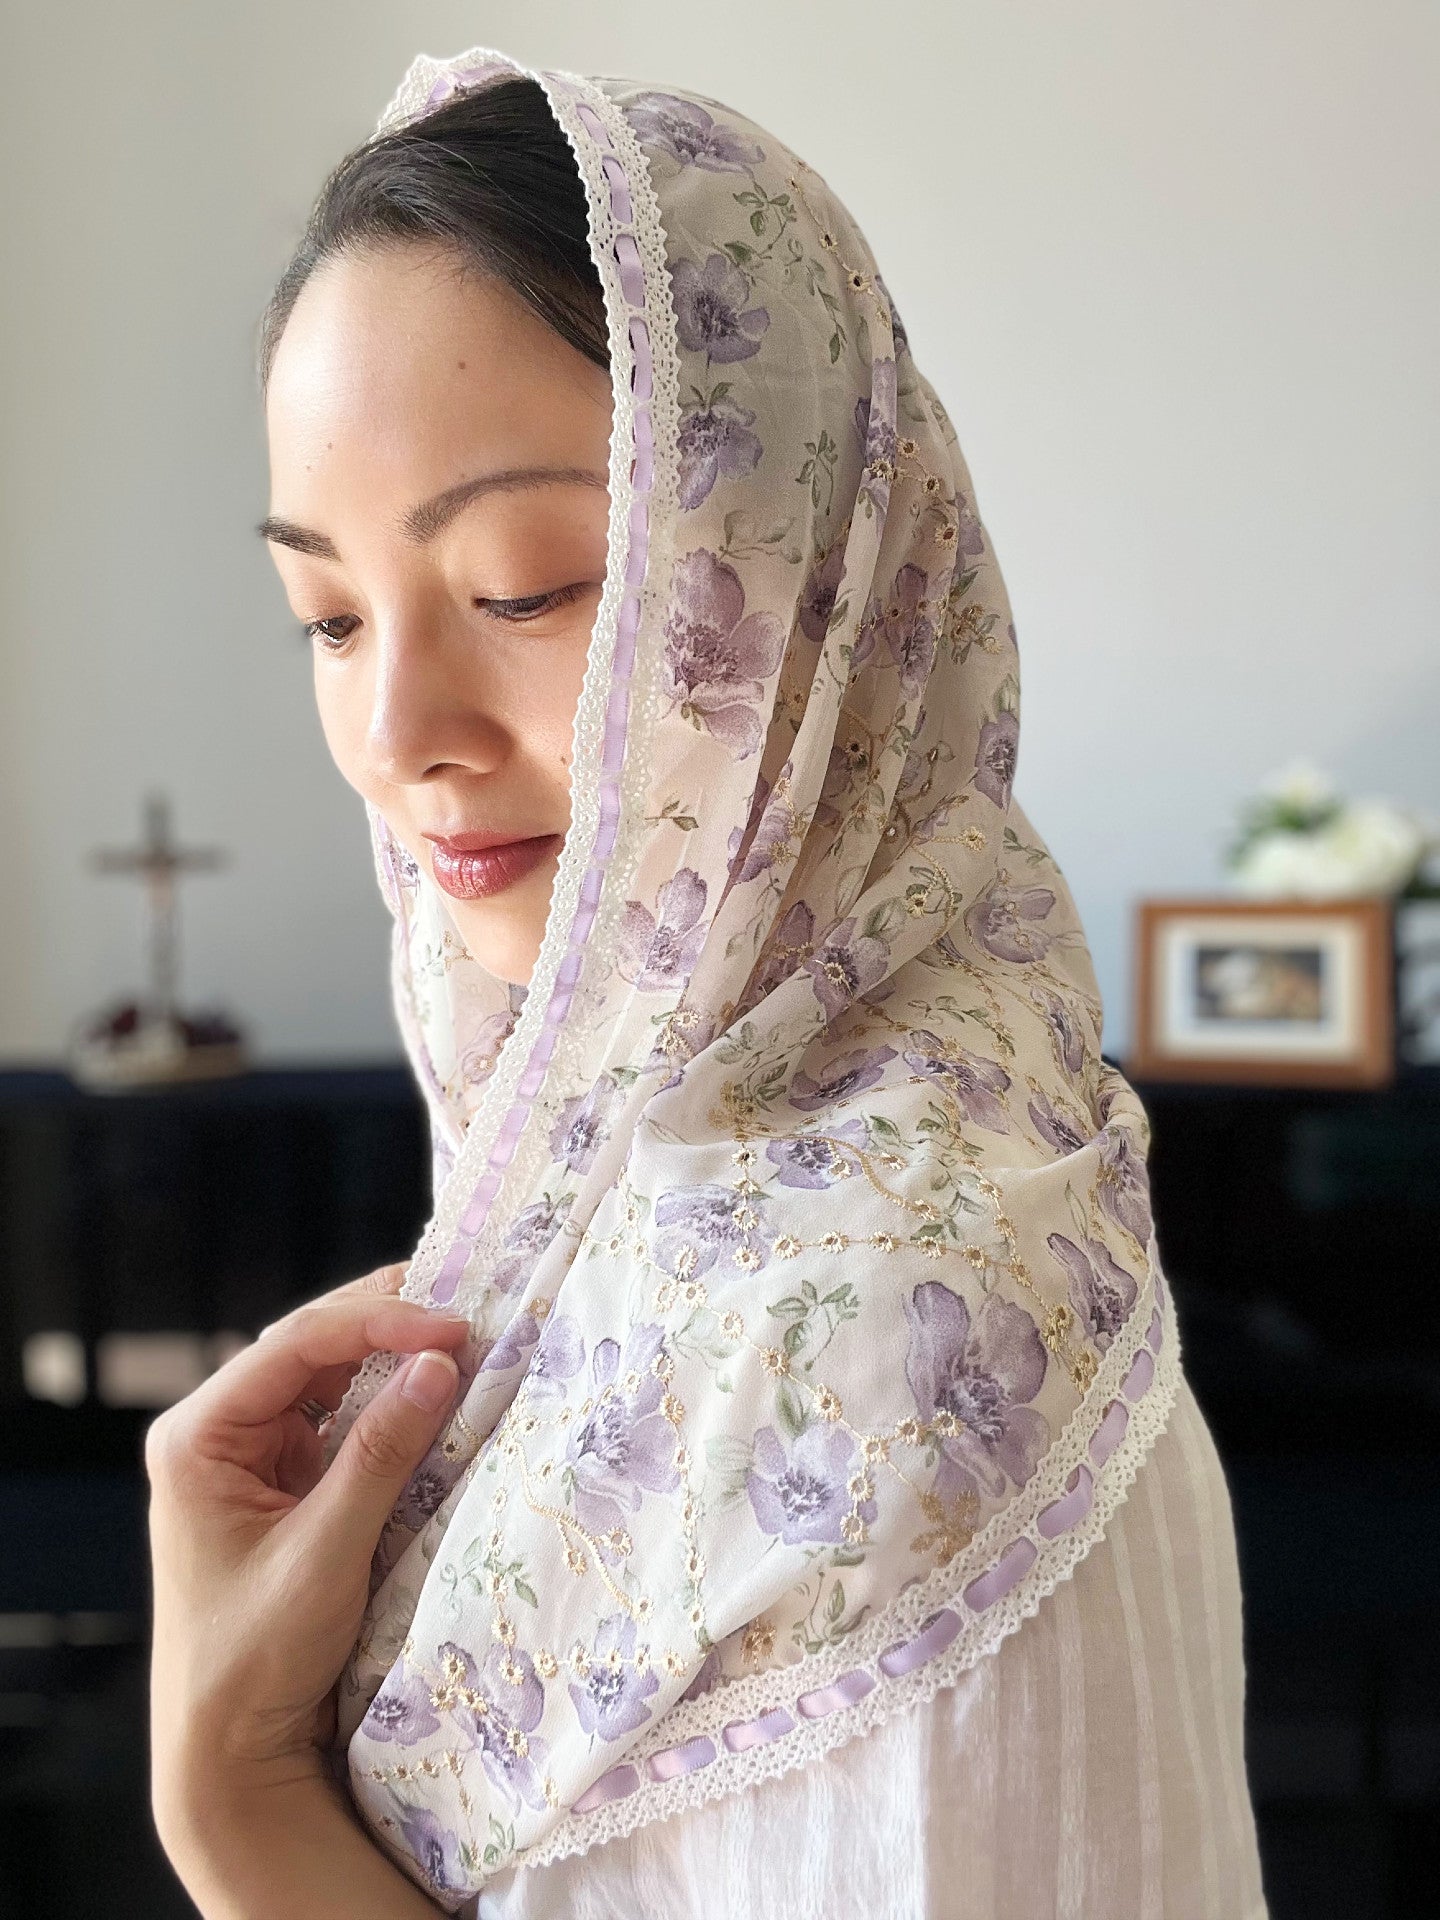 PRE-ORDER "God of Mercy and Compassion" Floral Chiffon Infinity Veil (Light purple / Cream)